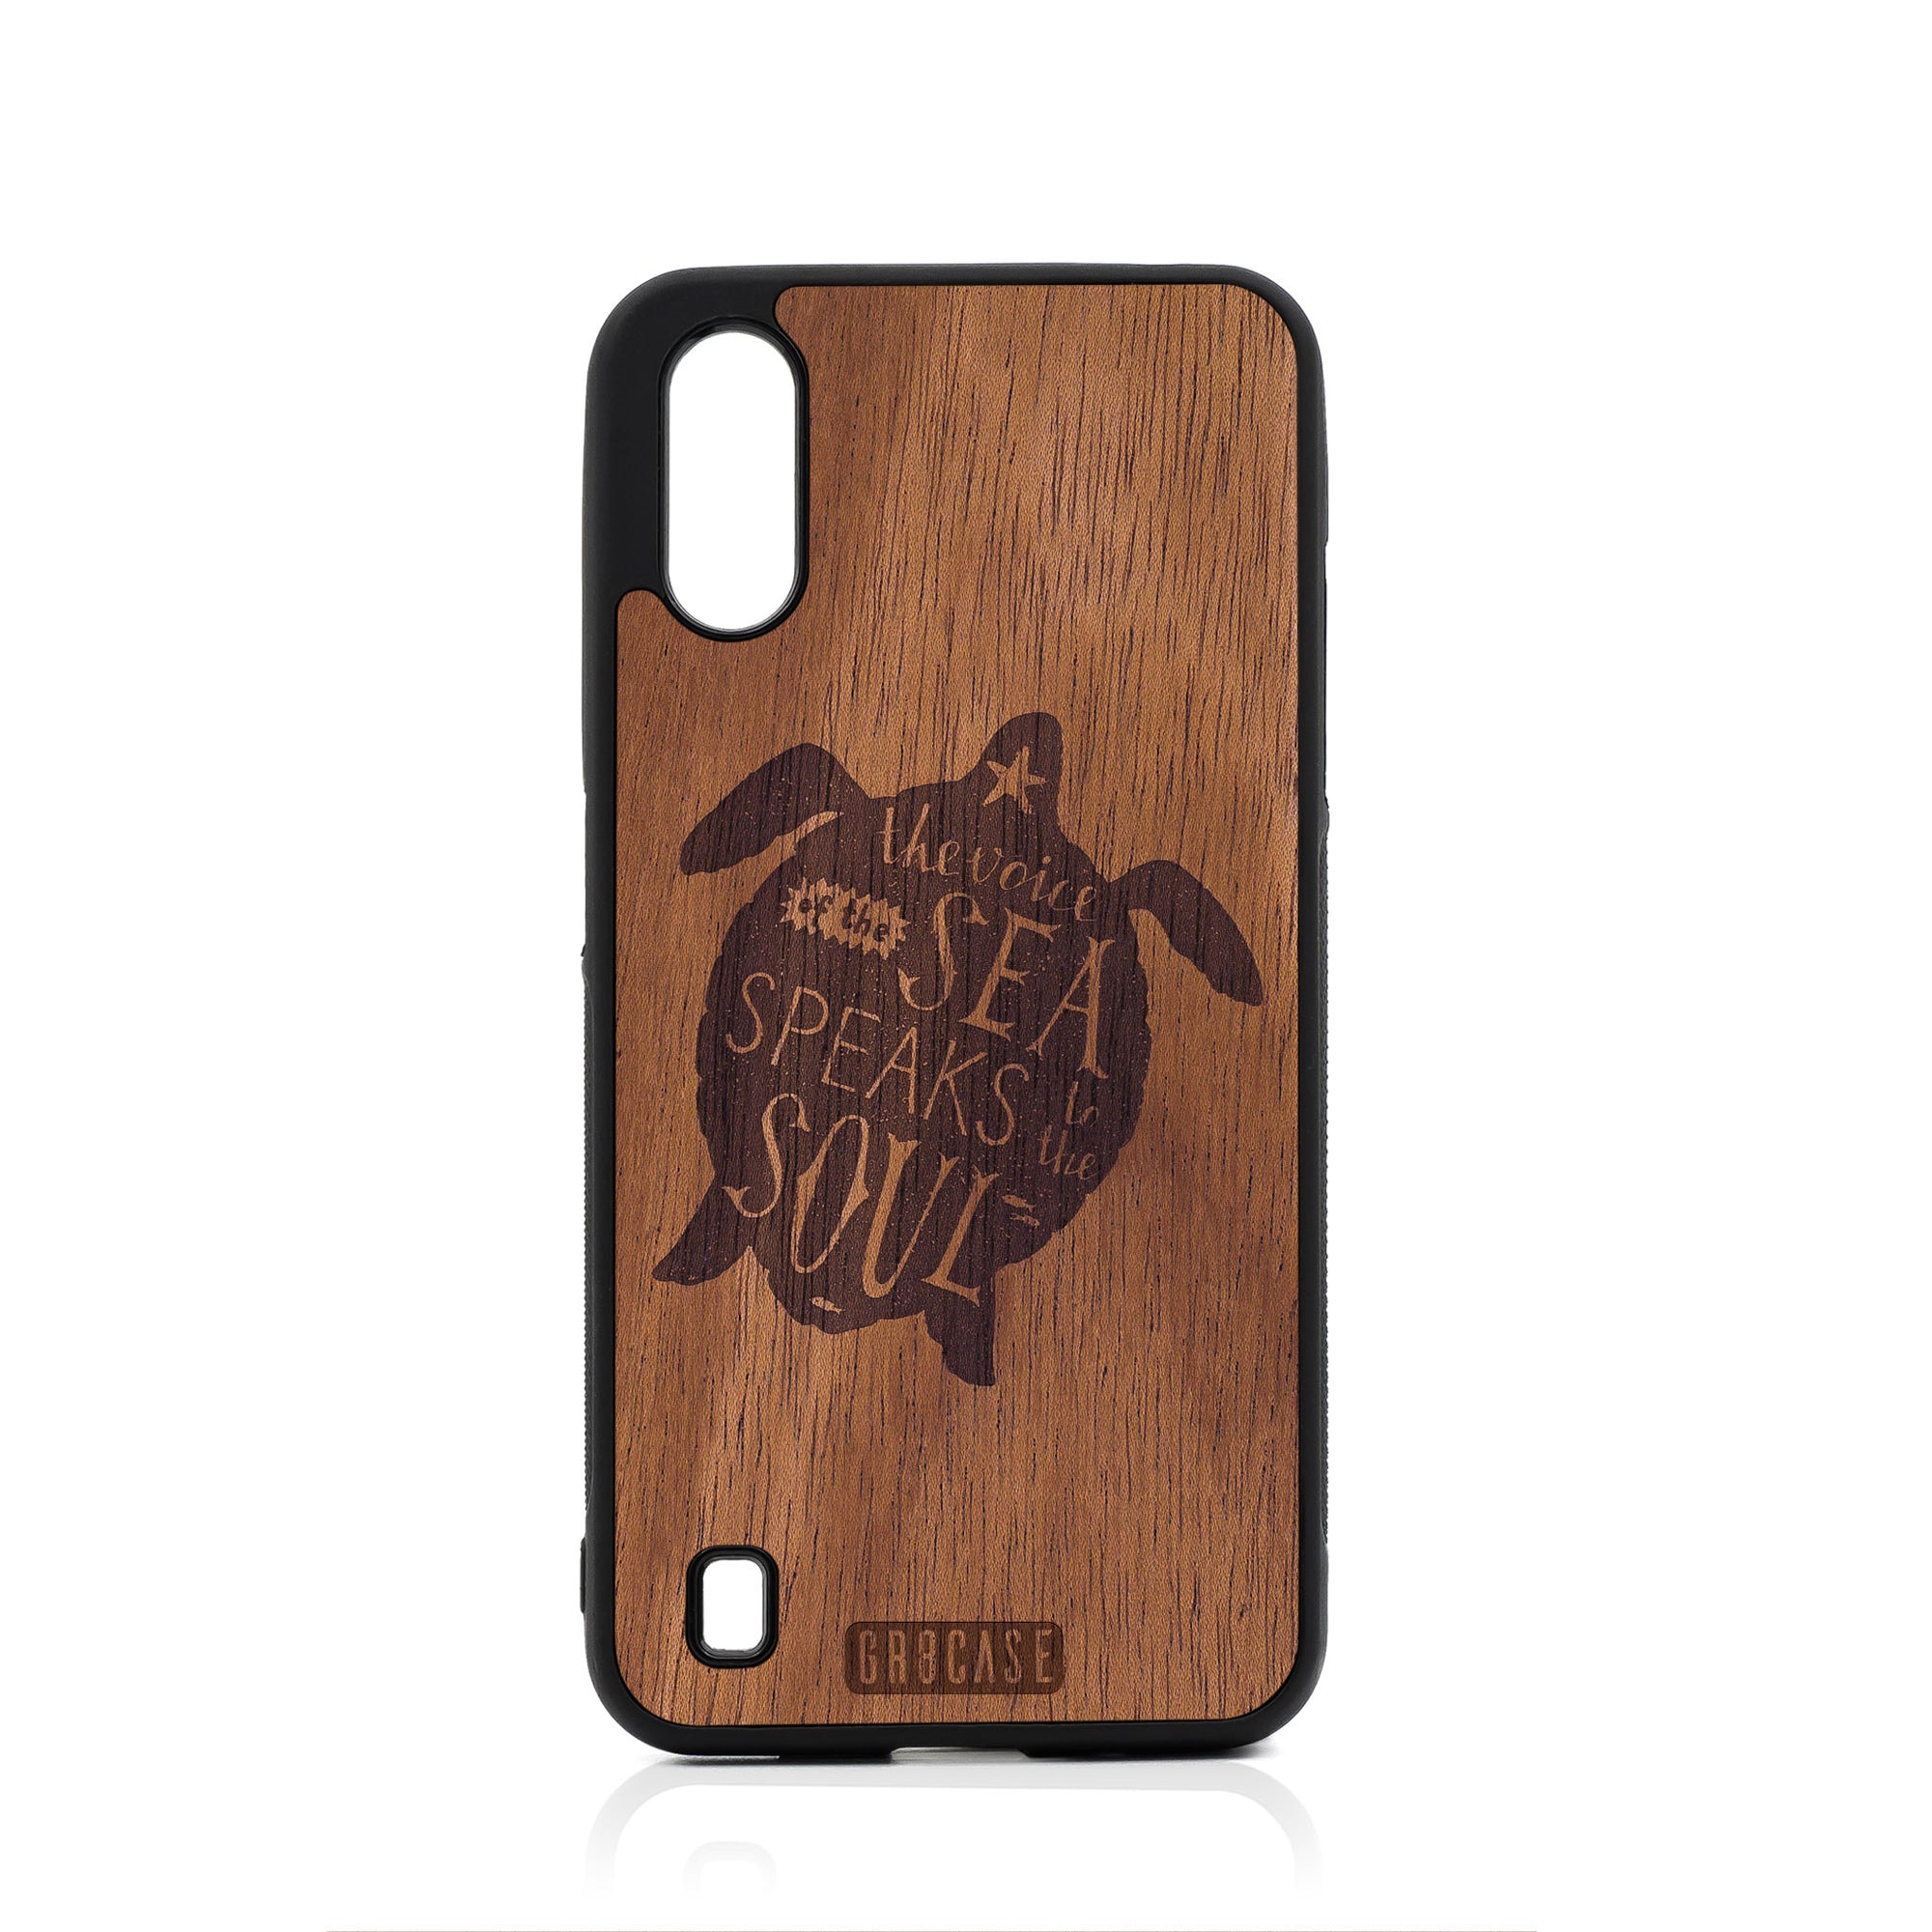 The Voice Of The Sea Speaks To The Soul (Turtle) Design Wood Case For Samsung Galaxy A01